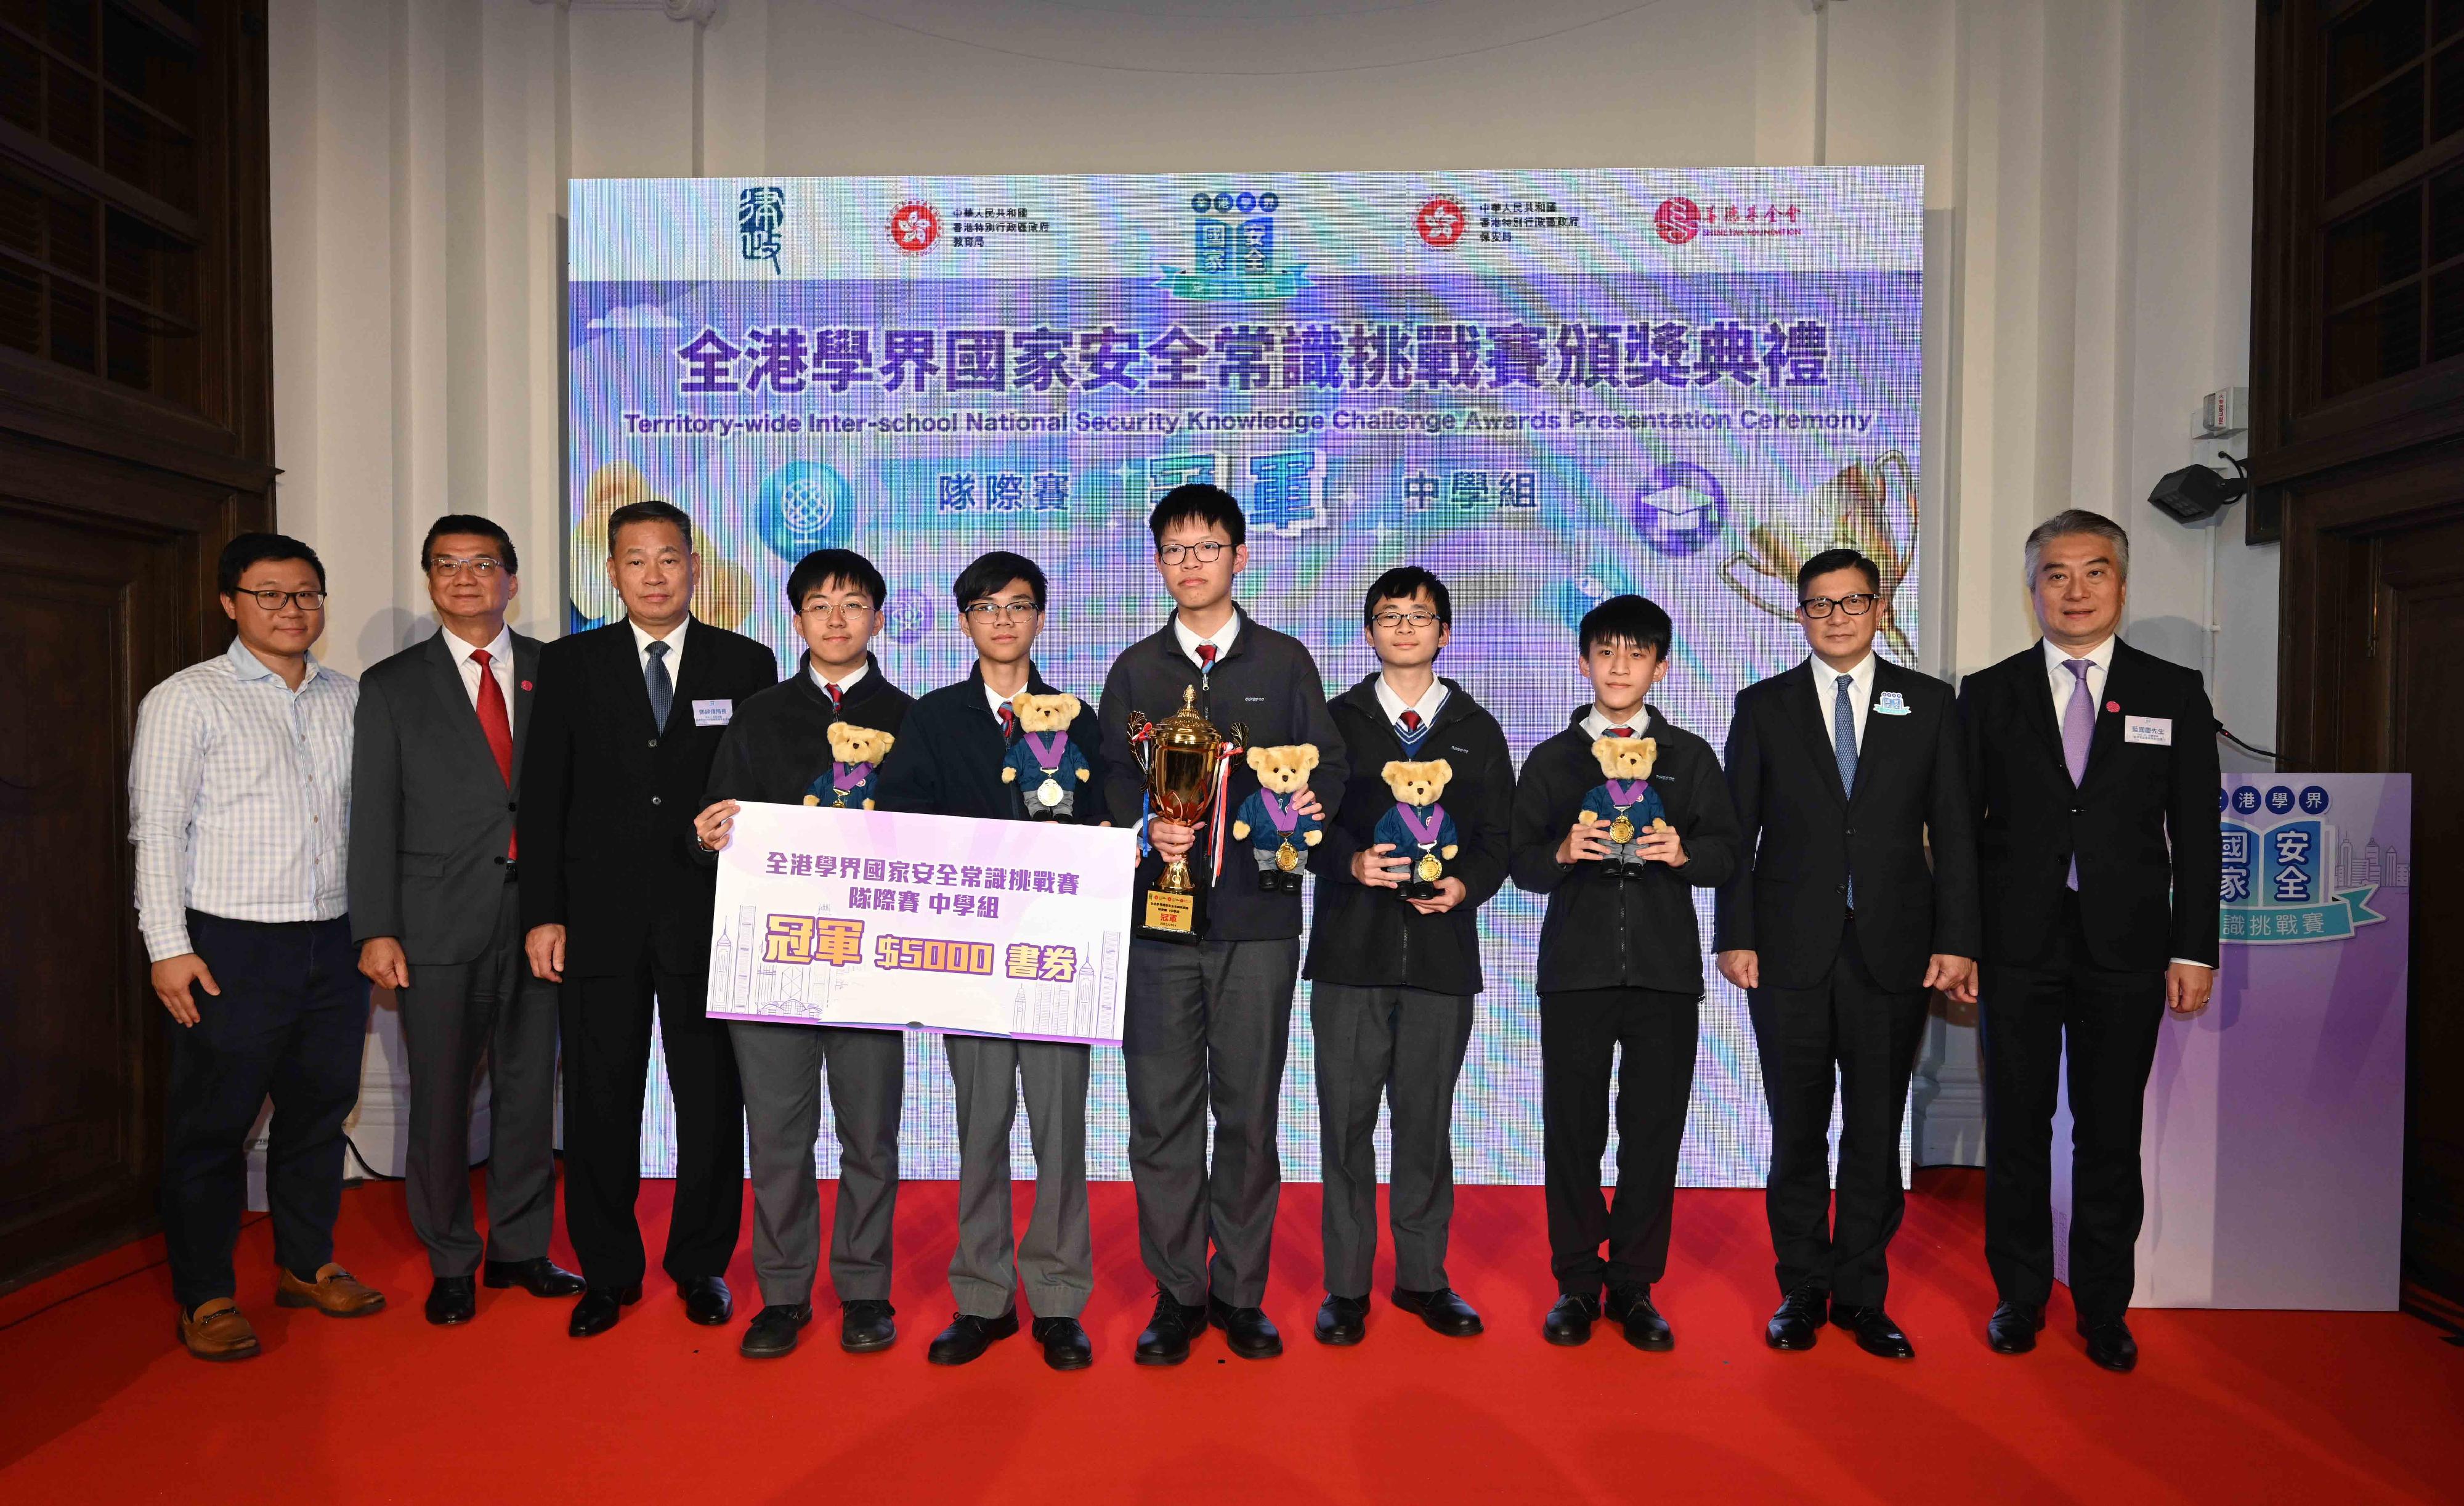 The Territory-wide Inter-school National Security Knowledge Challenge, jointly organised by the Department of Justice, the Security Bureau, the Education Bureau and the Hong Kong Shine Tak Foundation, held its finals this morning (February 26), and a prize presentation ceremony at the former French Mission Building in the afternoon. Photo shows the Secretary for Security, Mr Tang Ping-keung (second right); the Director-General of the Bureau of Liaison of the Office for Safeguarding National Security of the Central People's Government in the Hong Kong Special Administrative Region, Mr Deng Jianwei (third left); and other guests presenting the Champion award of secondary school team competition to participants from the CNEC Christian College.